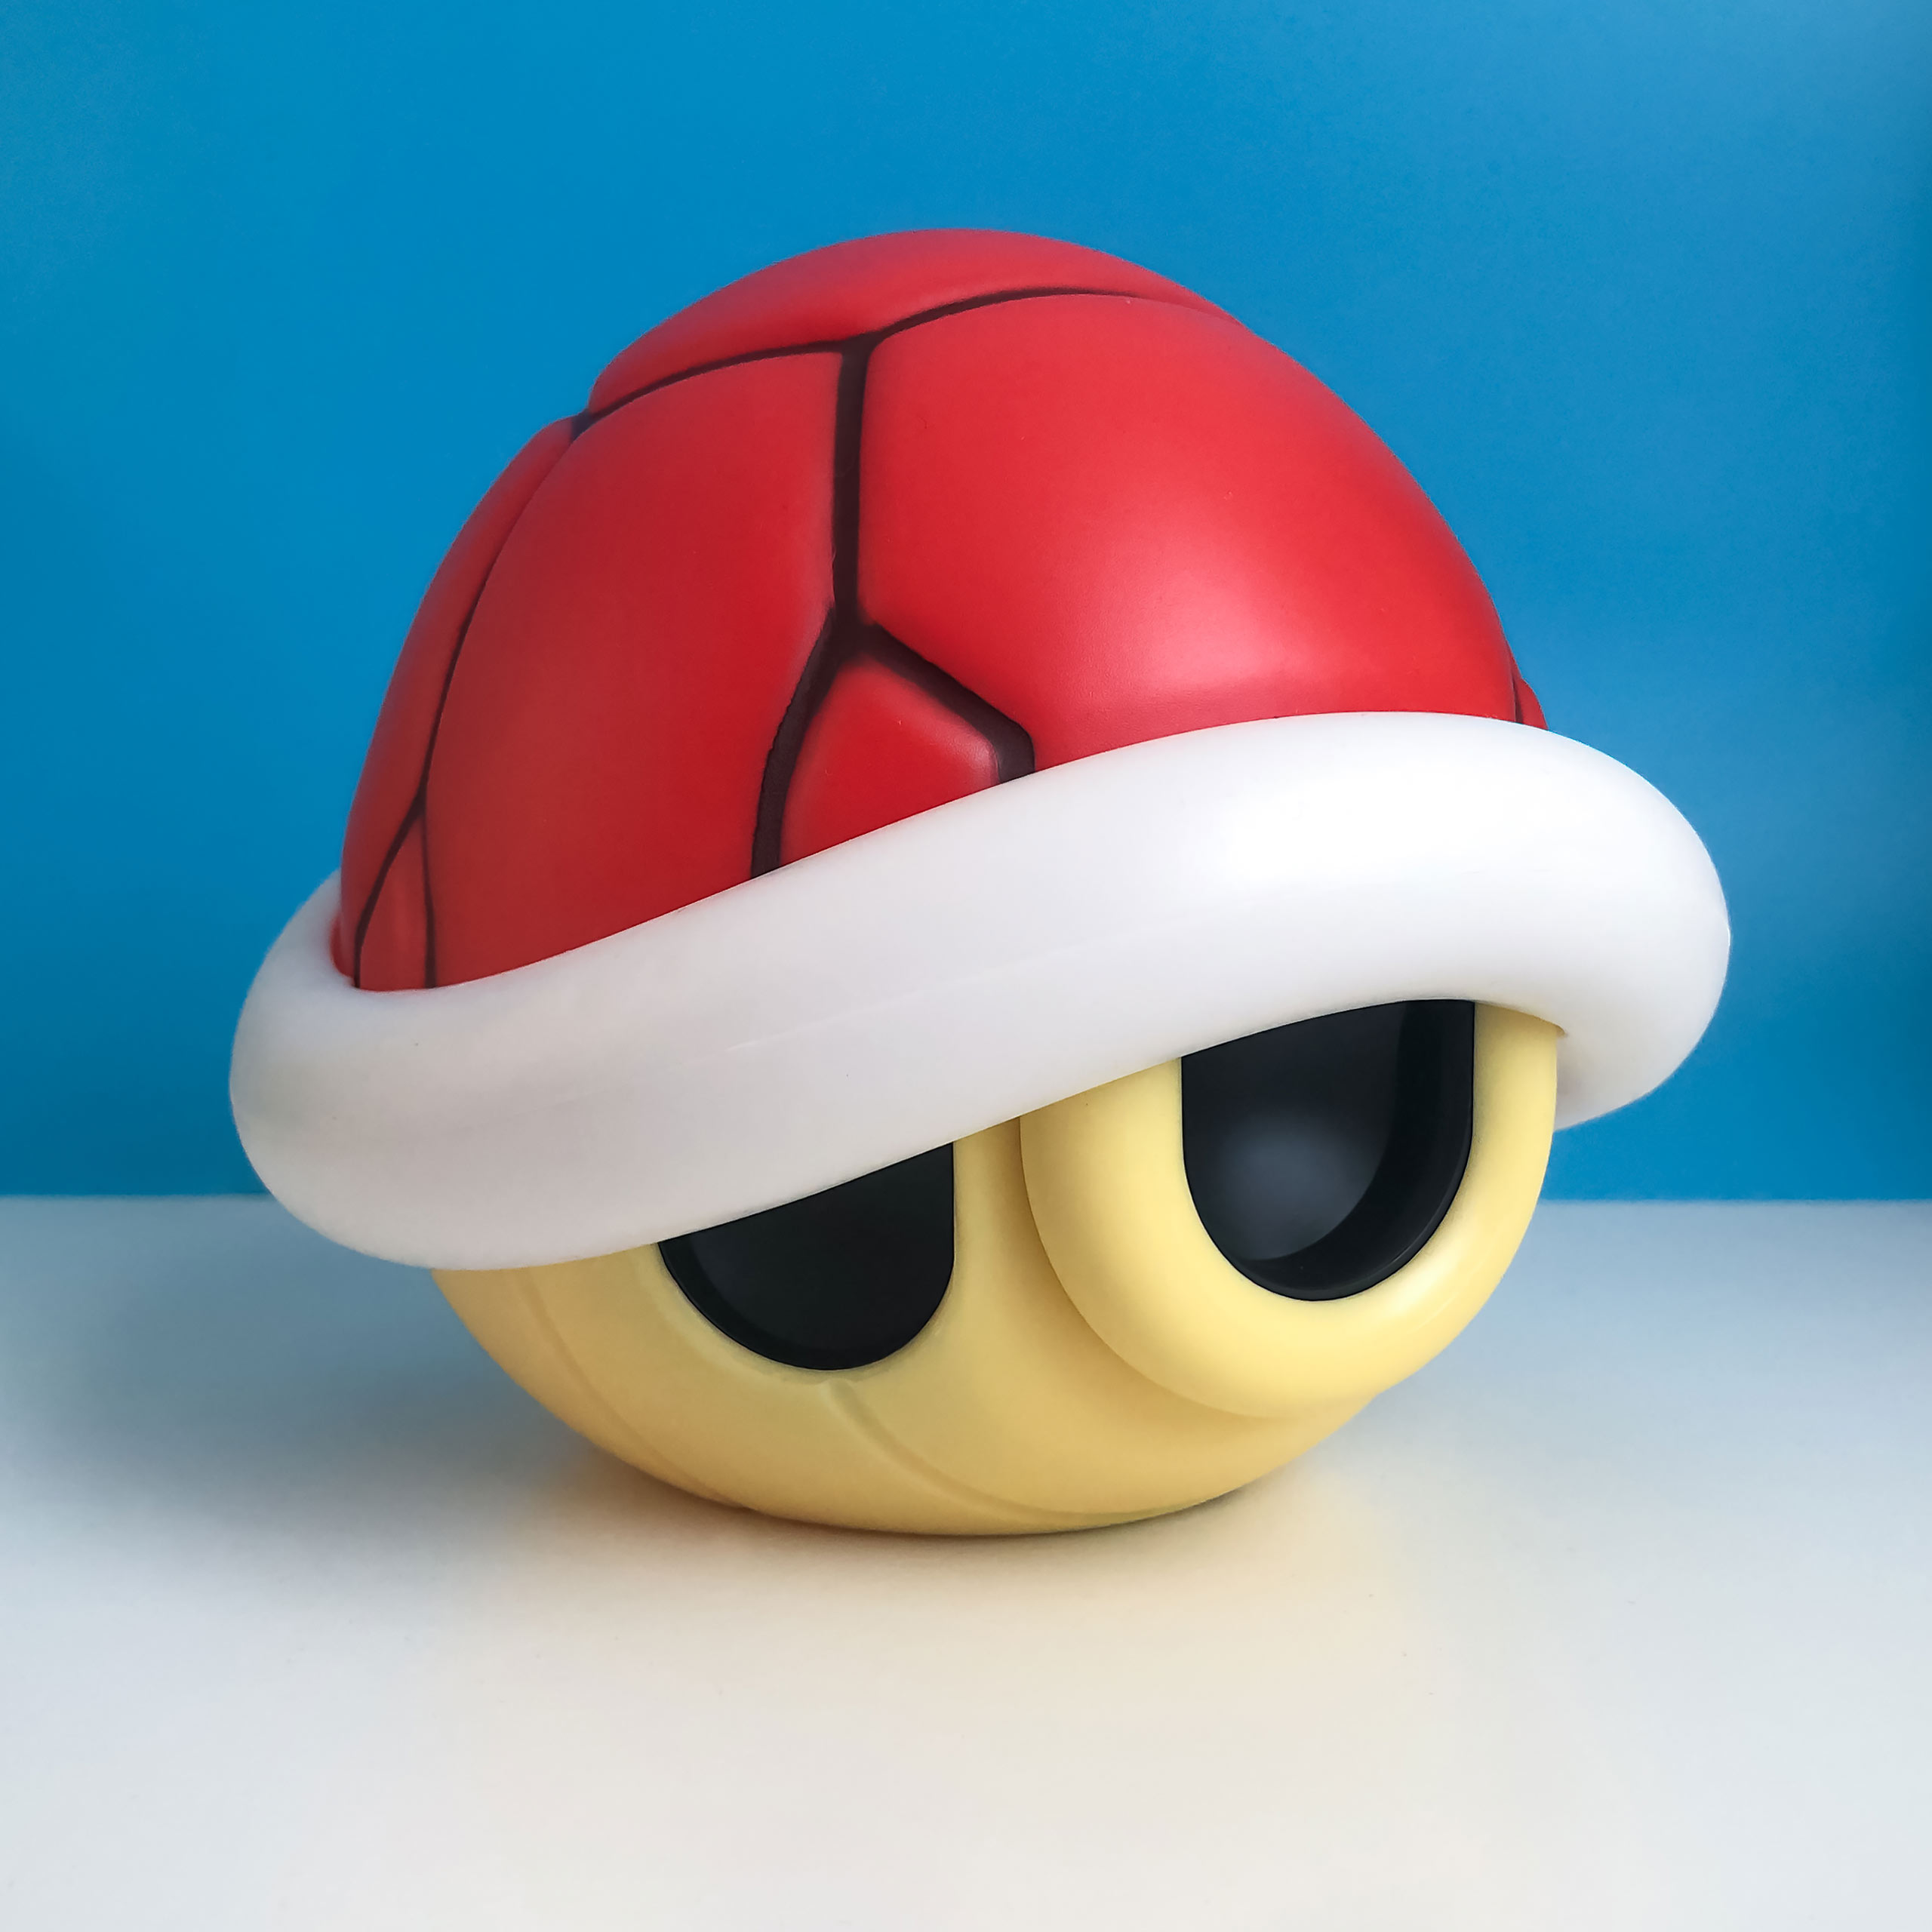 Super Mario - Red Shell Table Lamp with Sound